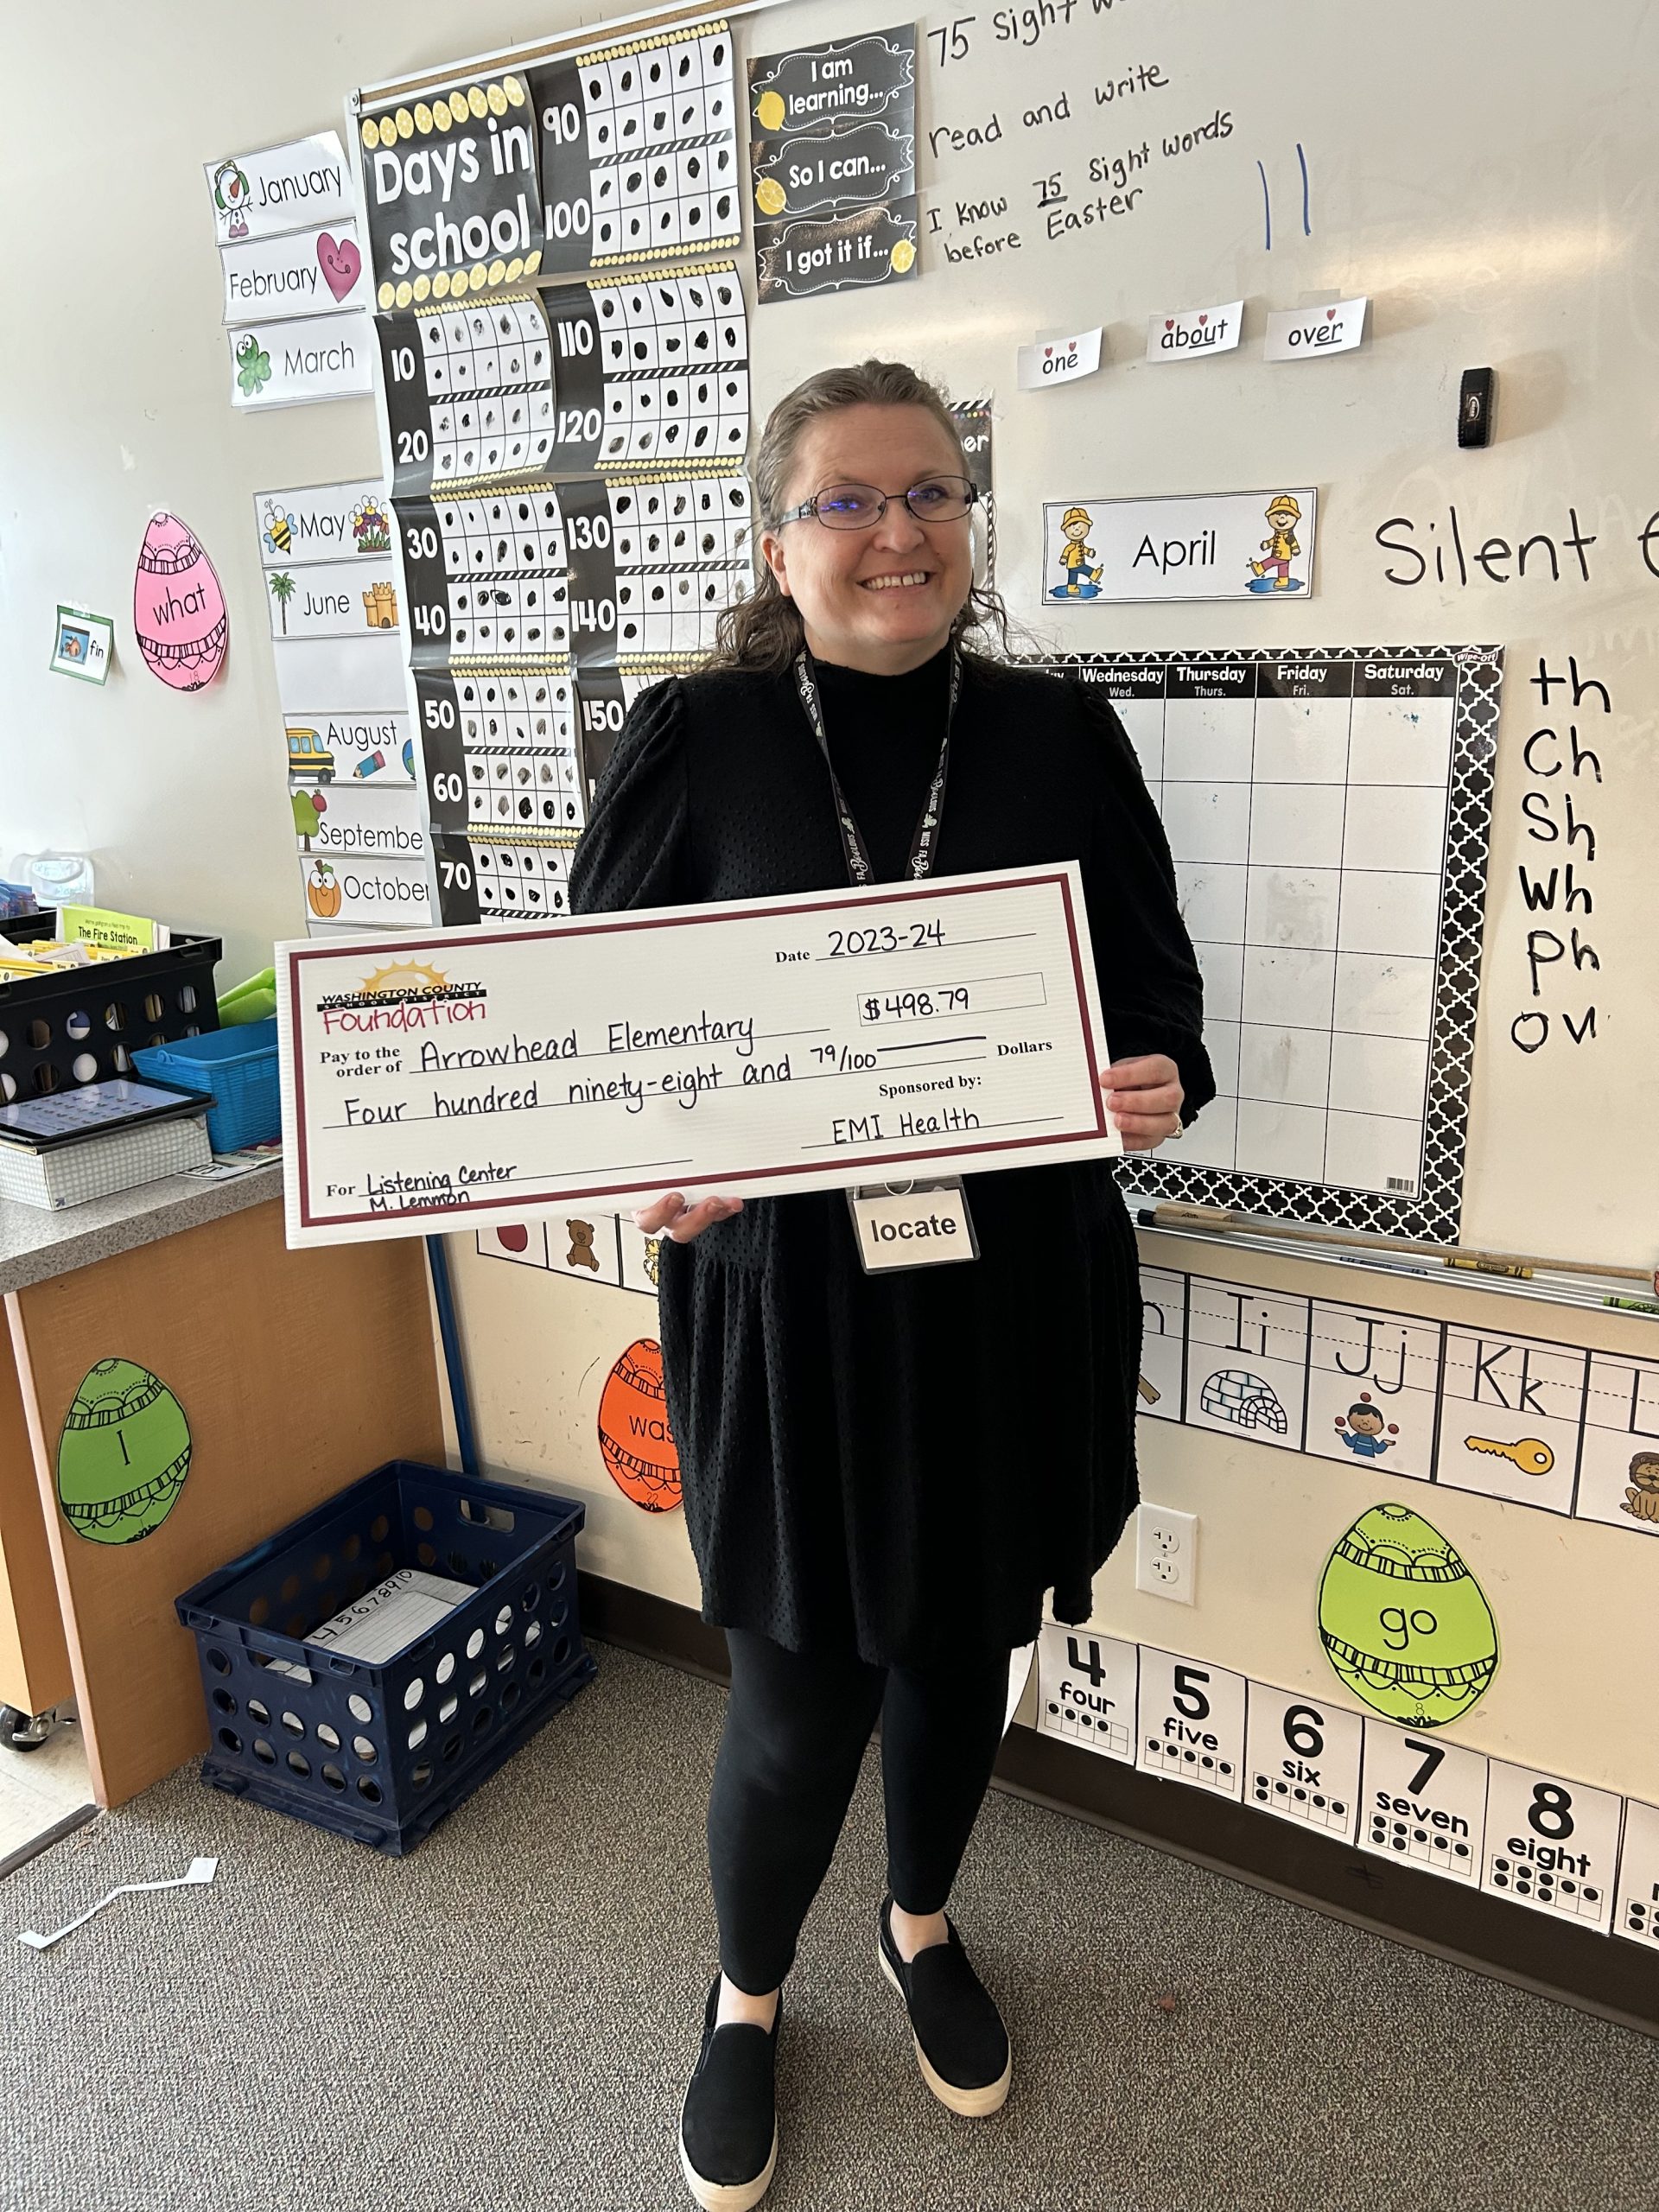 Mrs. Lemmon received a Foundation Grant for the 2023-24 school year. Thank you EMI Health for new listening center for our classroom.